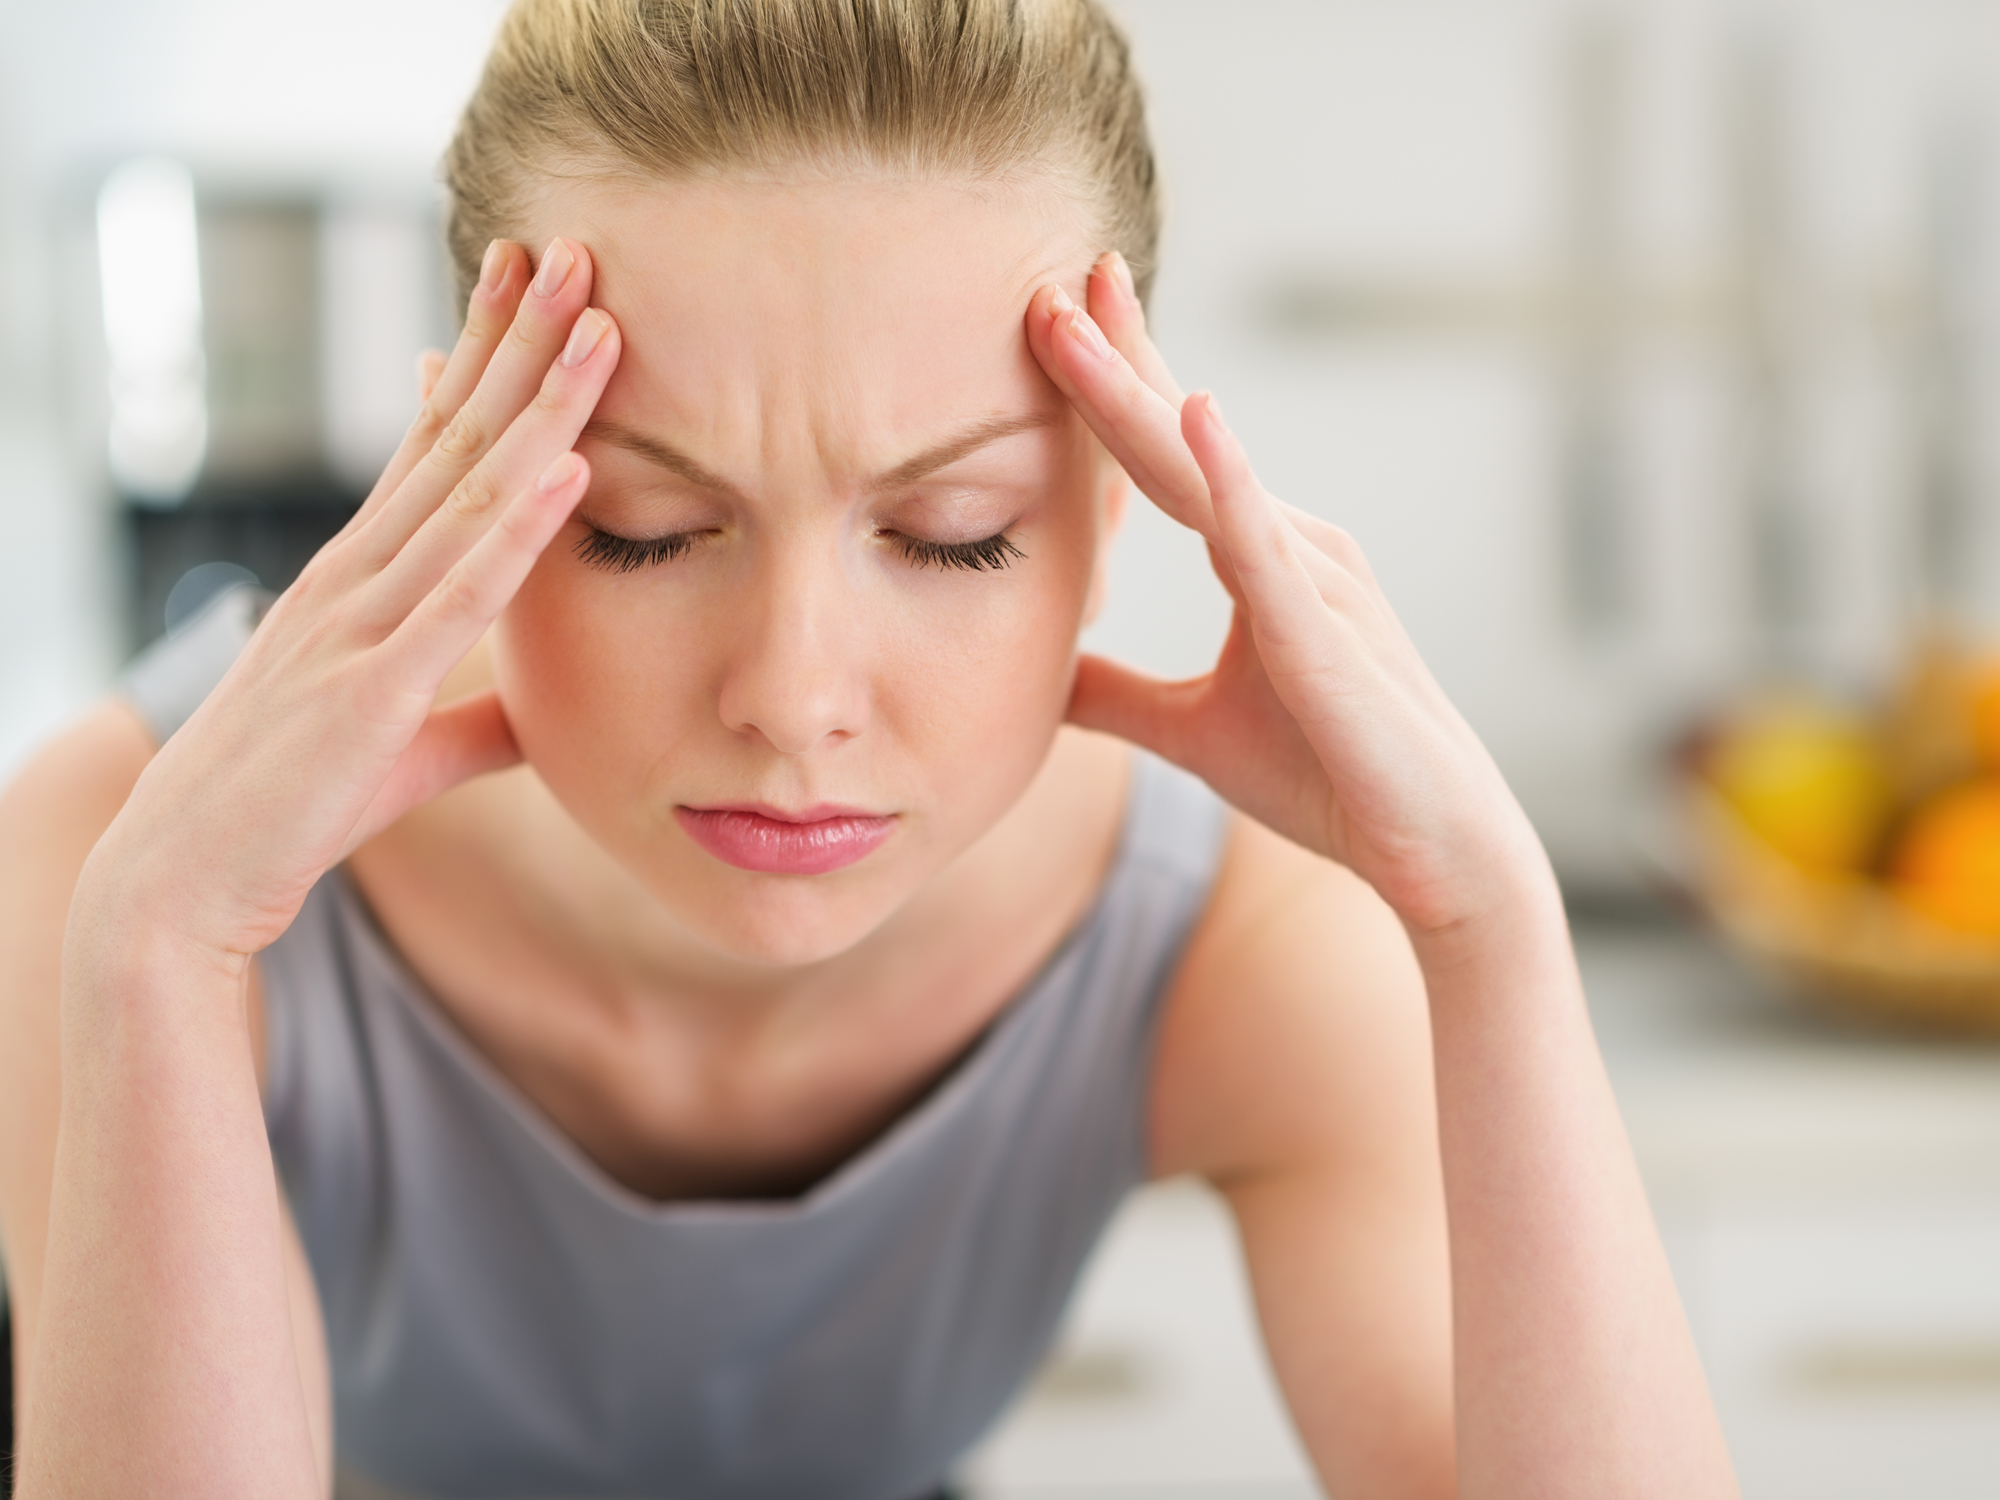 The simple vitamin cocktail cure for migraines